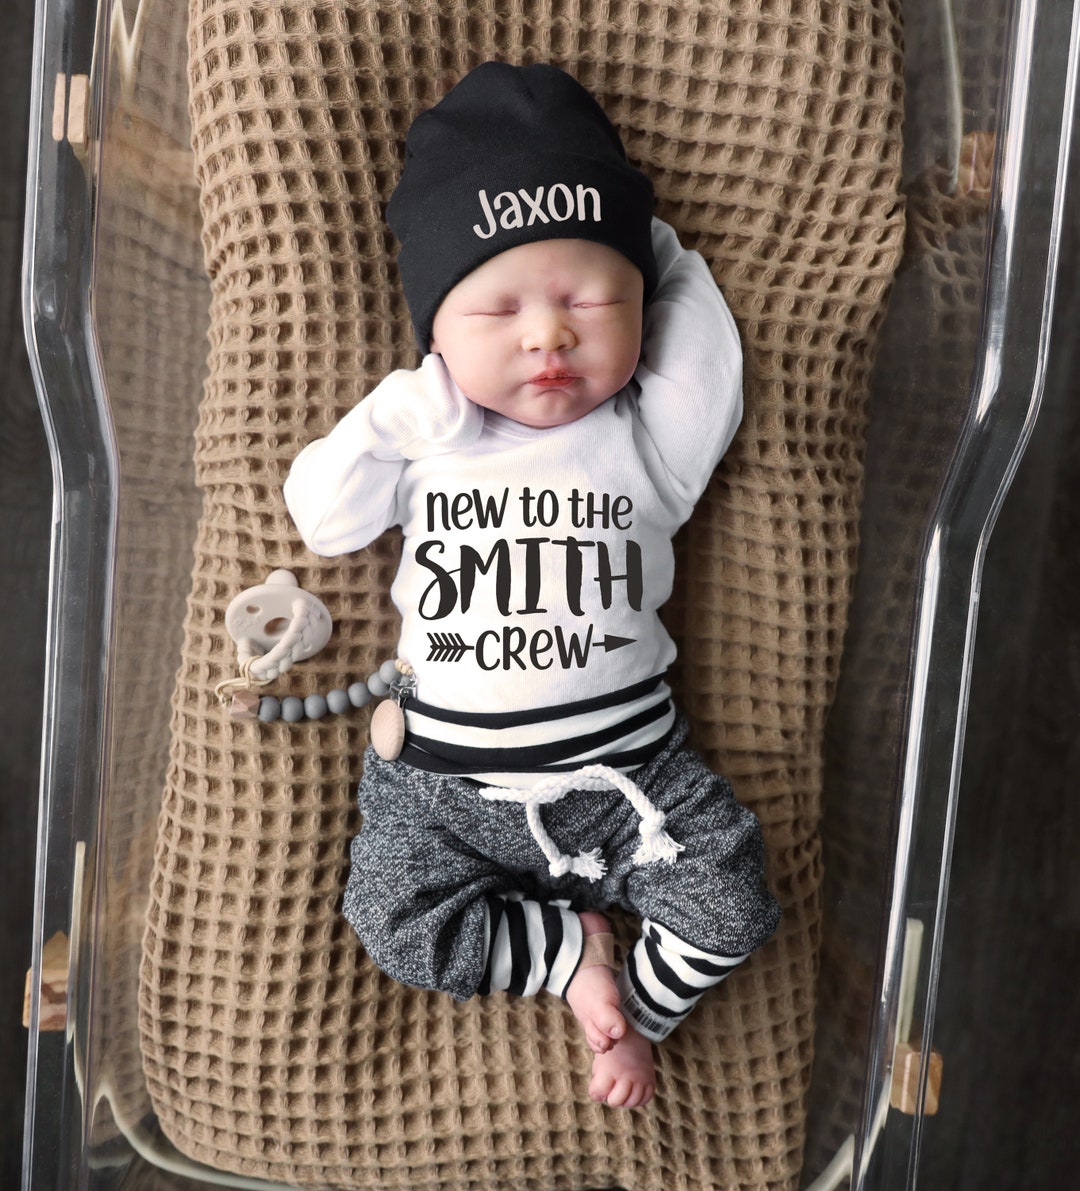 Cowboy Newborn Baby Knit Hat And Pants Outfit Set Photography Prop Sale